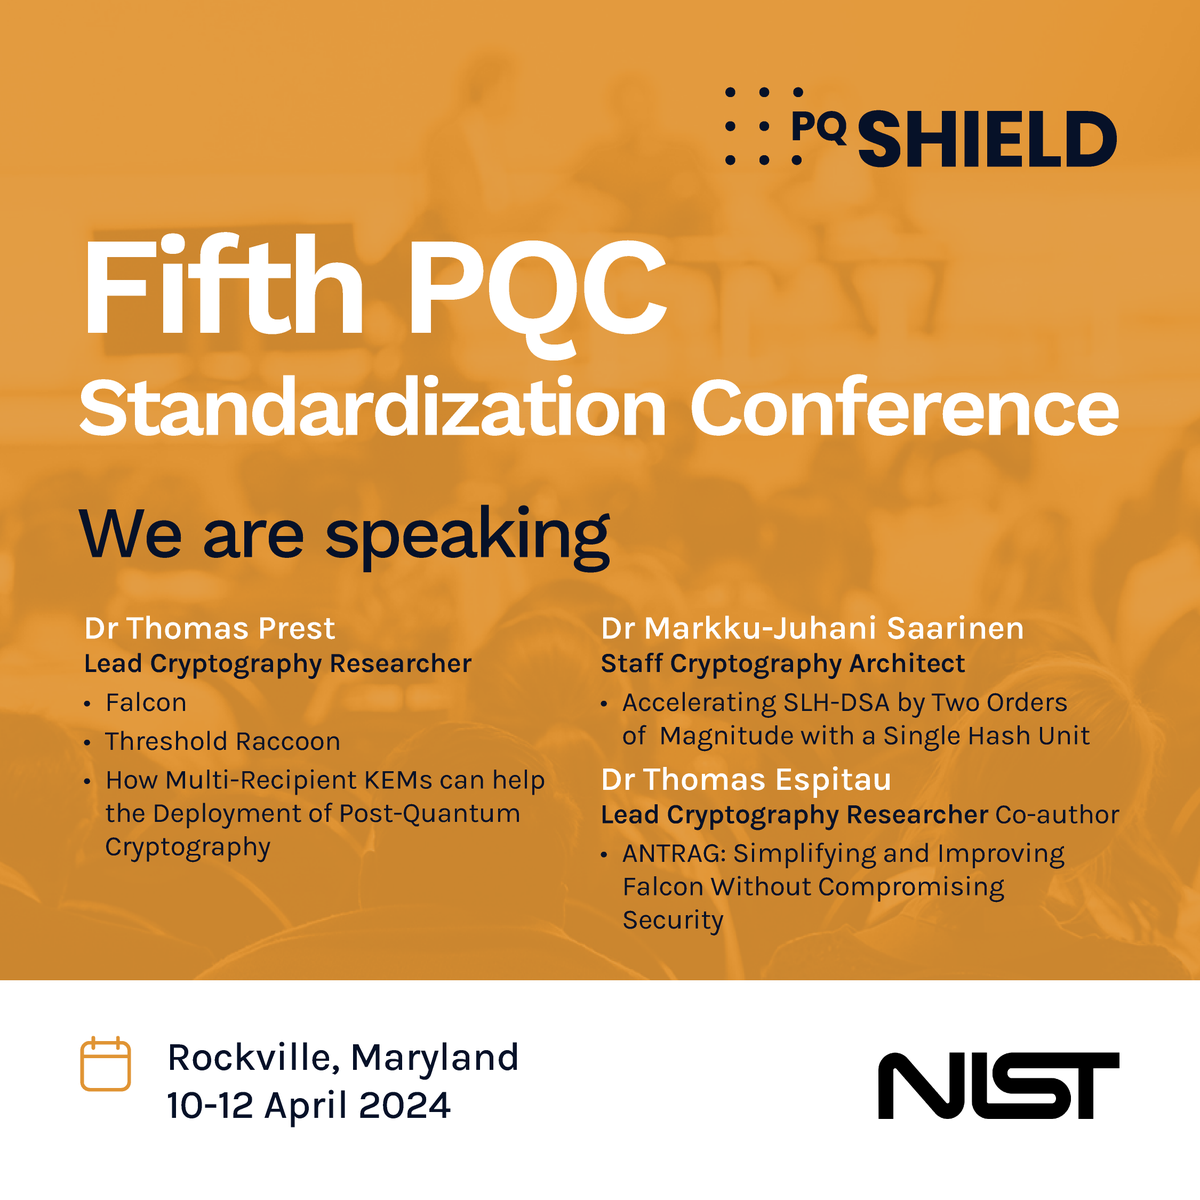 We are looking forward to speaking at the Fifth PQC Standardization Conference in Rockville, MD 10-12 April 2024. Not one, but 5 talks by the wonderful PQShield team! Hope to see you there too. #cryptography #cybersecurity #NIST